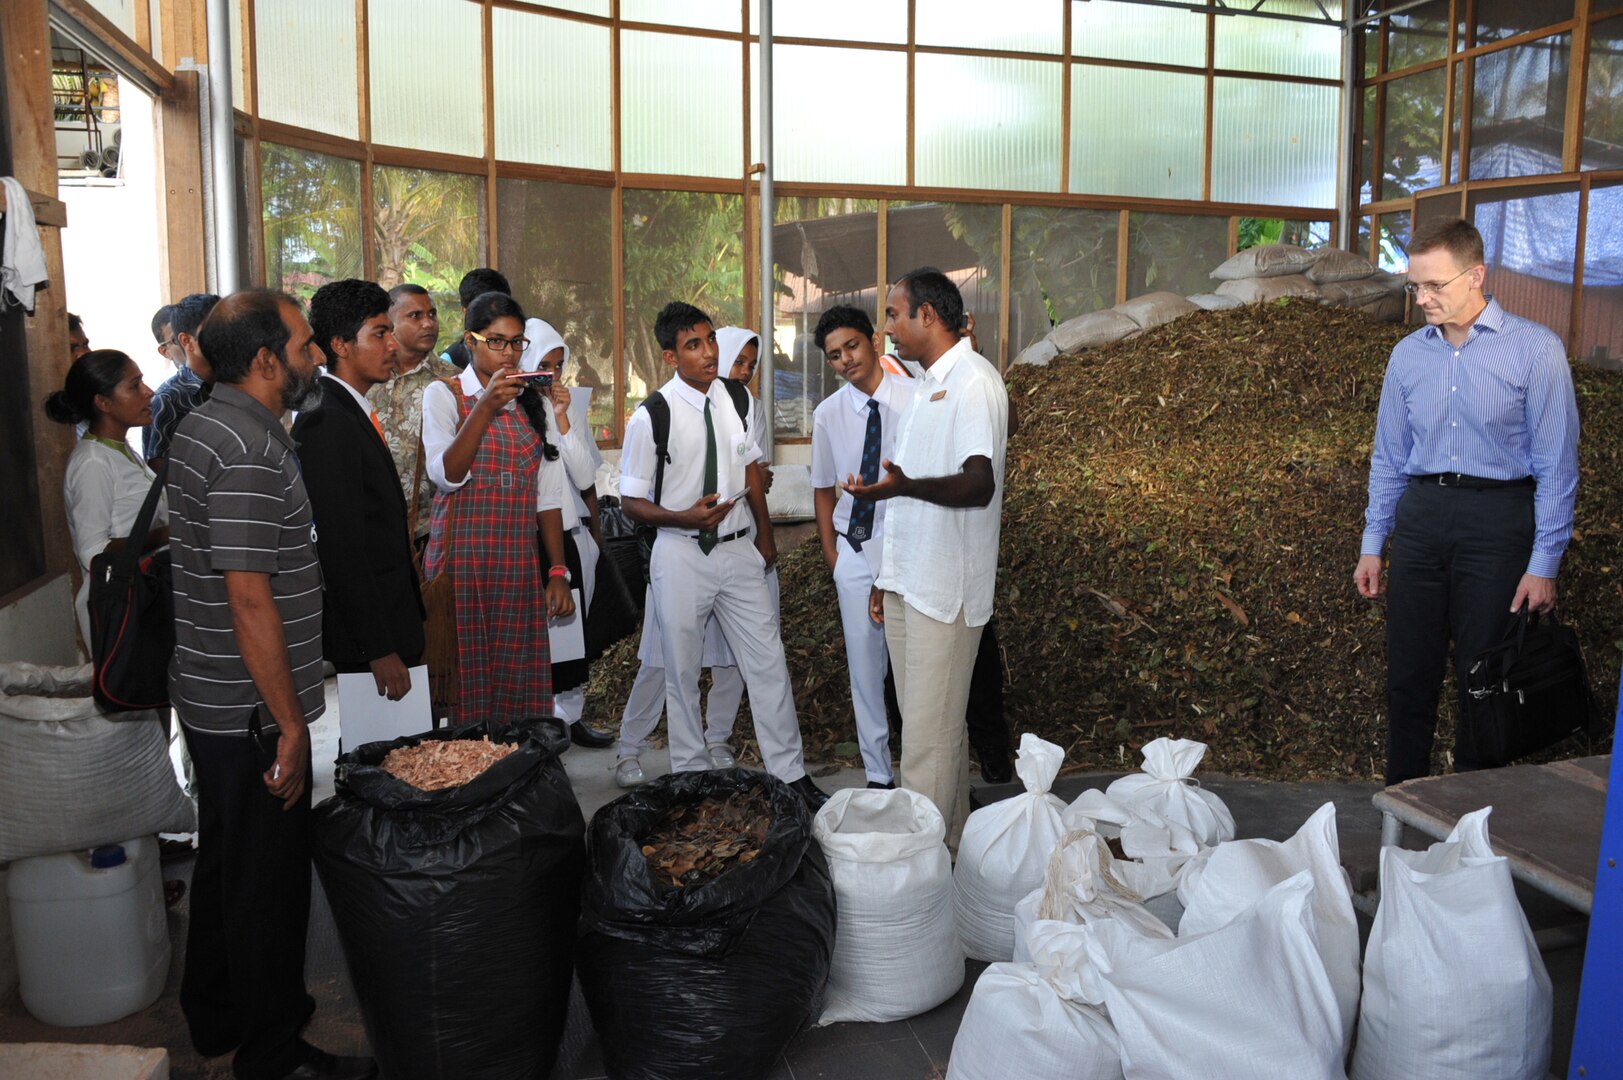 THULUSDHOO ISLAND, Maldives (June 4, 2014) Brig. Gen. Mark McLeod of U.S. Pacific Command tours a Maldivian business using environmentaly sustainabile practices with a group of school students from the Maldives at the South Asia Regional Environmental Security Forum. The Forum, which was held June 2-5 in the Maldives, involved representatives from nations throughout South Asia, international governmental organizations, and observers and promotes regional cooperation on the topics of water security, waste management, resource protection and energy.  (US Army photo by Justin Pummell/Released)